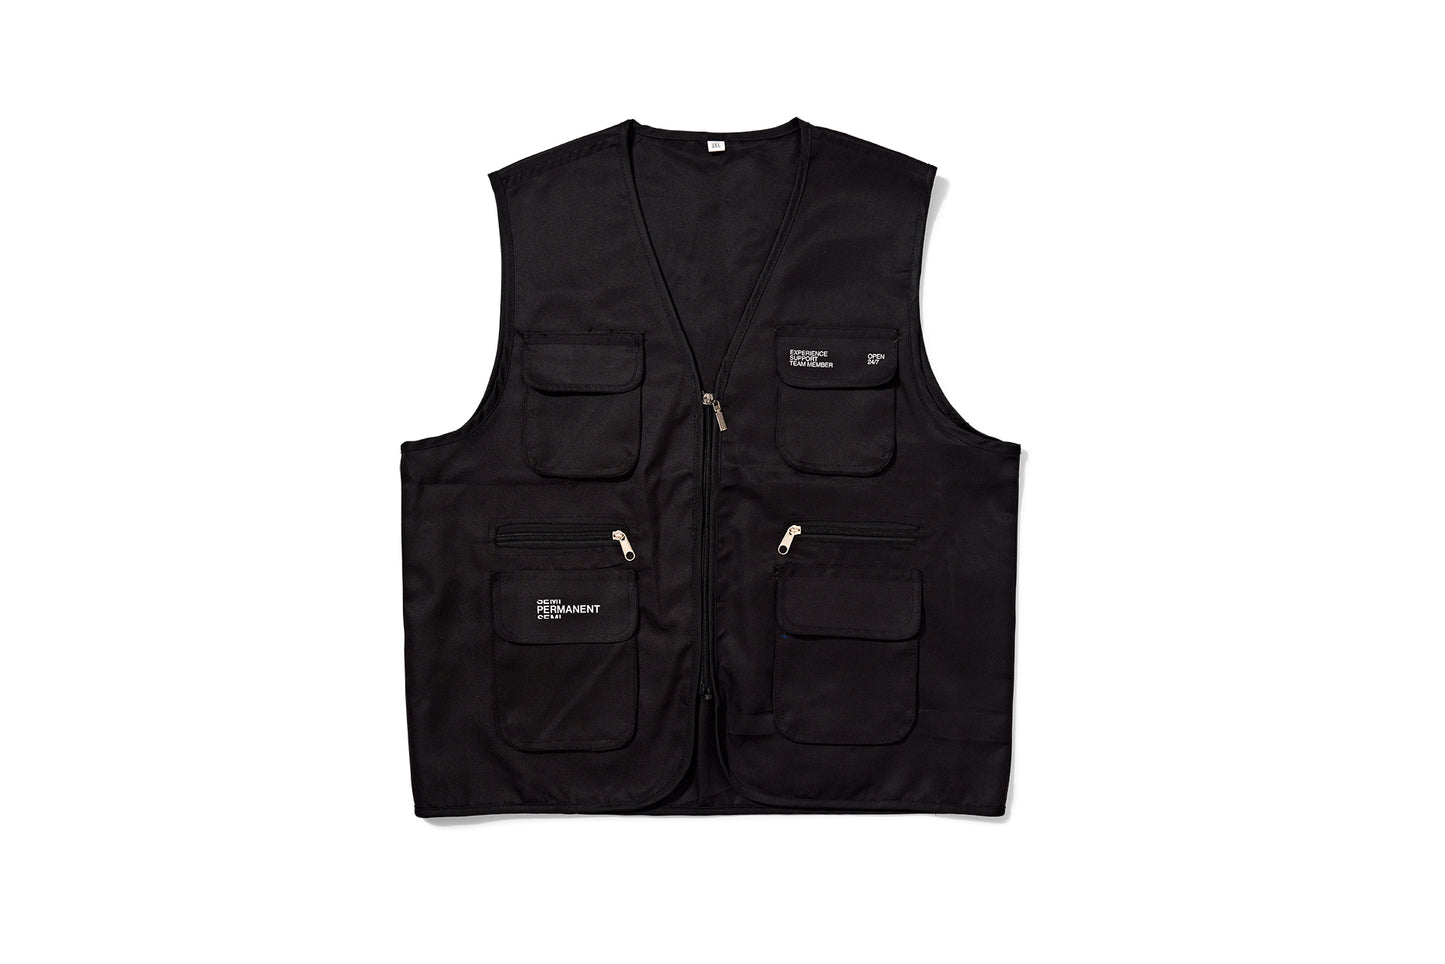 EXPERIENCE SUPPORT TEAM MEMBER VEST